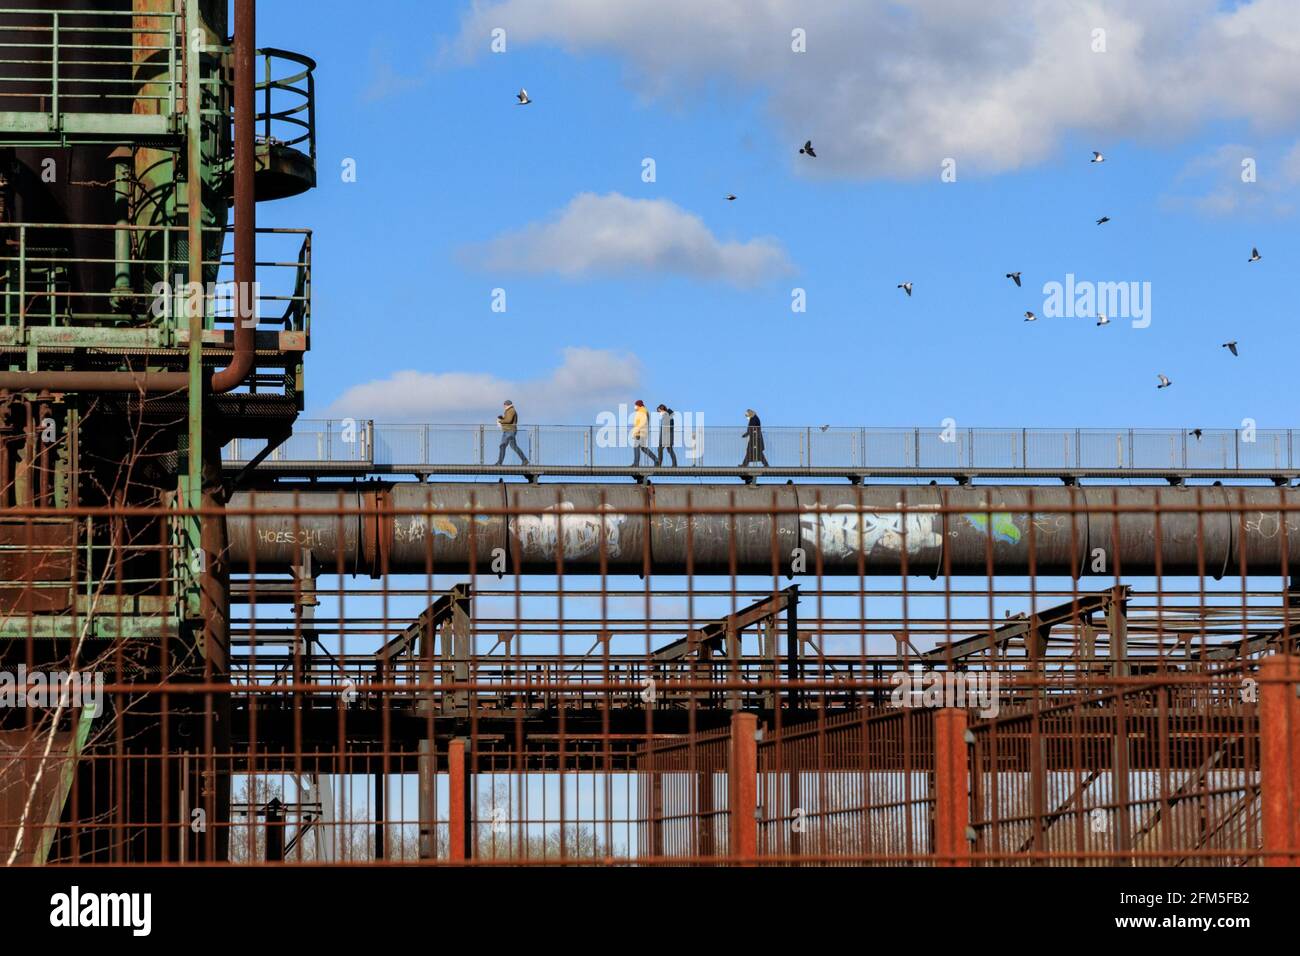 People walk on the Skywalk at the disused Phoenix West steelworks and blast furnace ironworks, formerly part of ThyssenKrupp in Dortmund, Germany Stock Photo